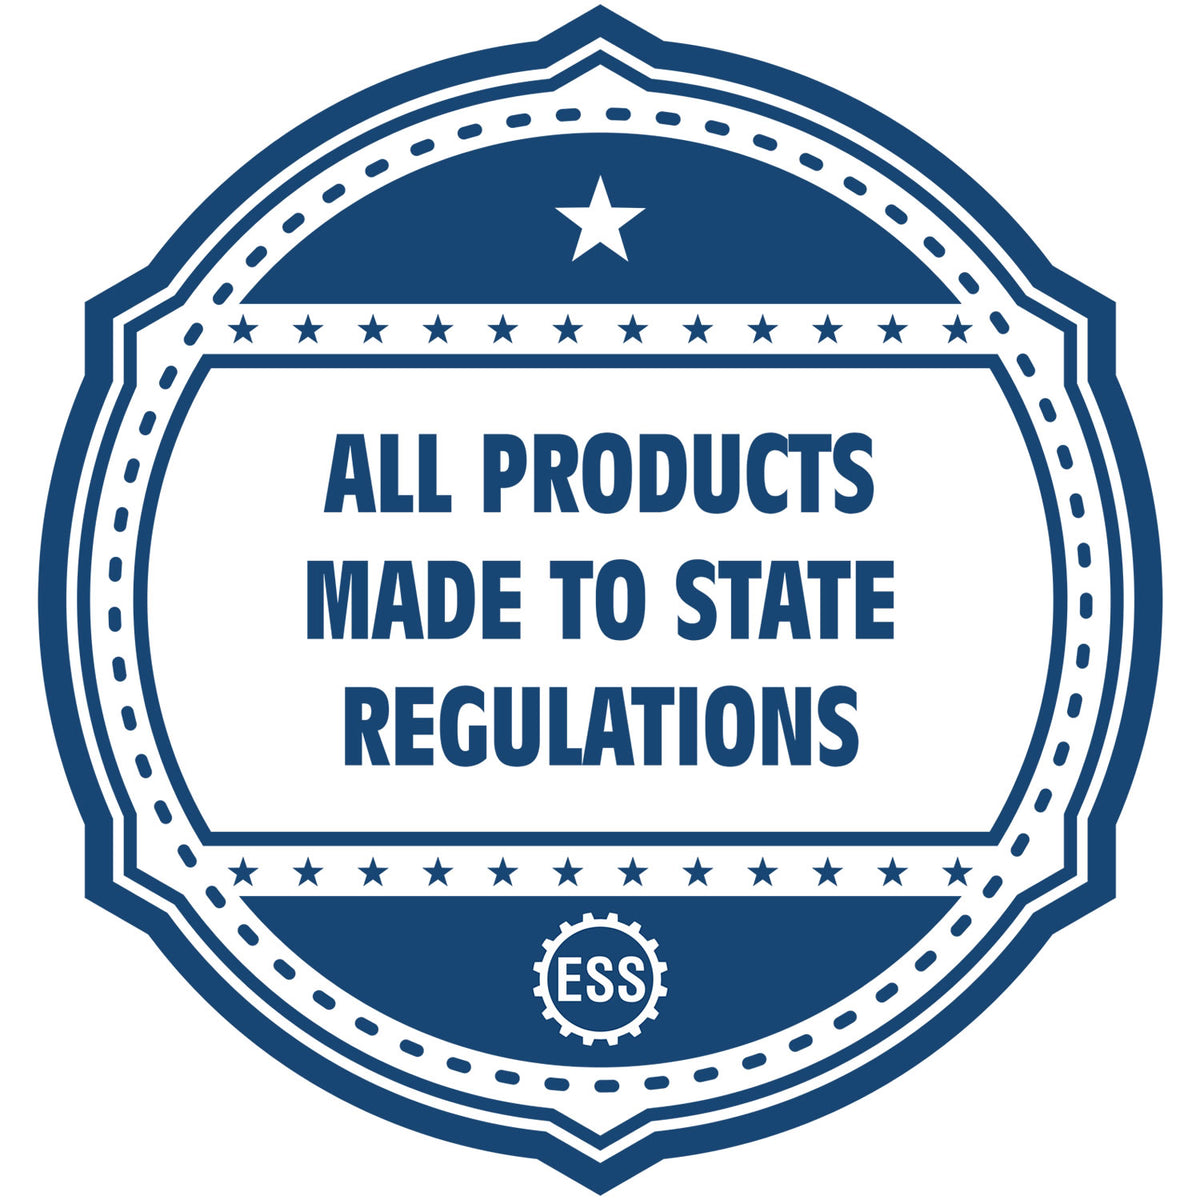 An icon or badge element for the Slim Pre-Inked State Seal Notary Stamp for Arizona showing that this product is made in compliance with state regulations.